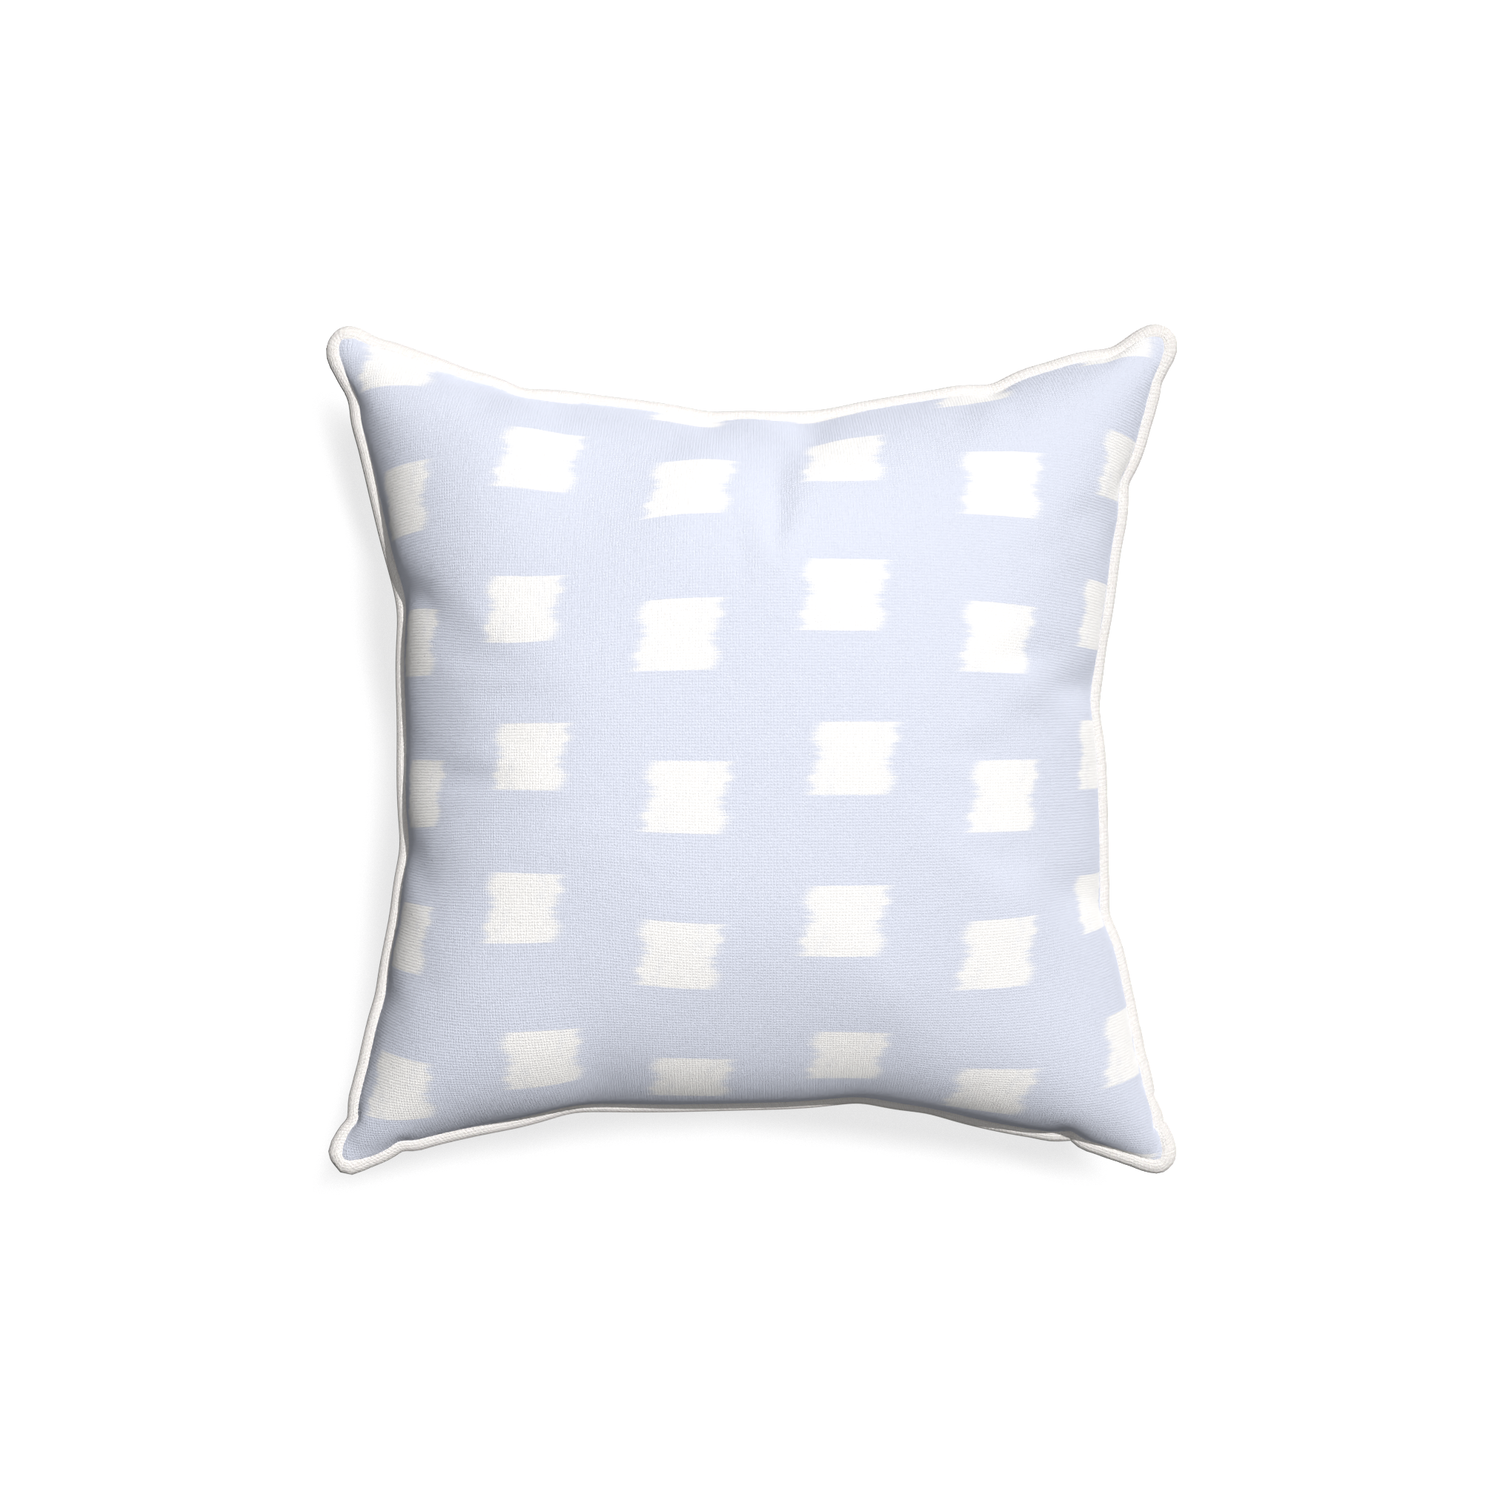 18-square denton custom pillow with snow piping on white background